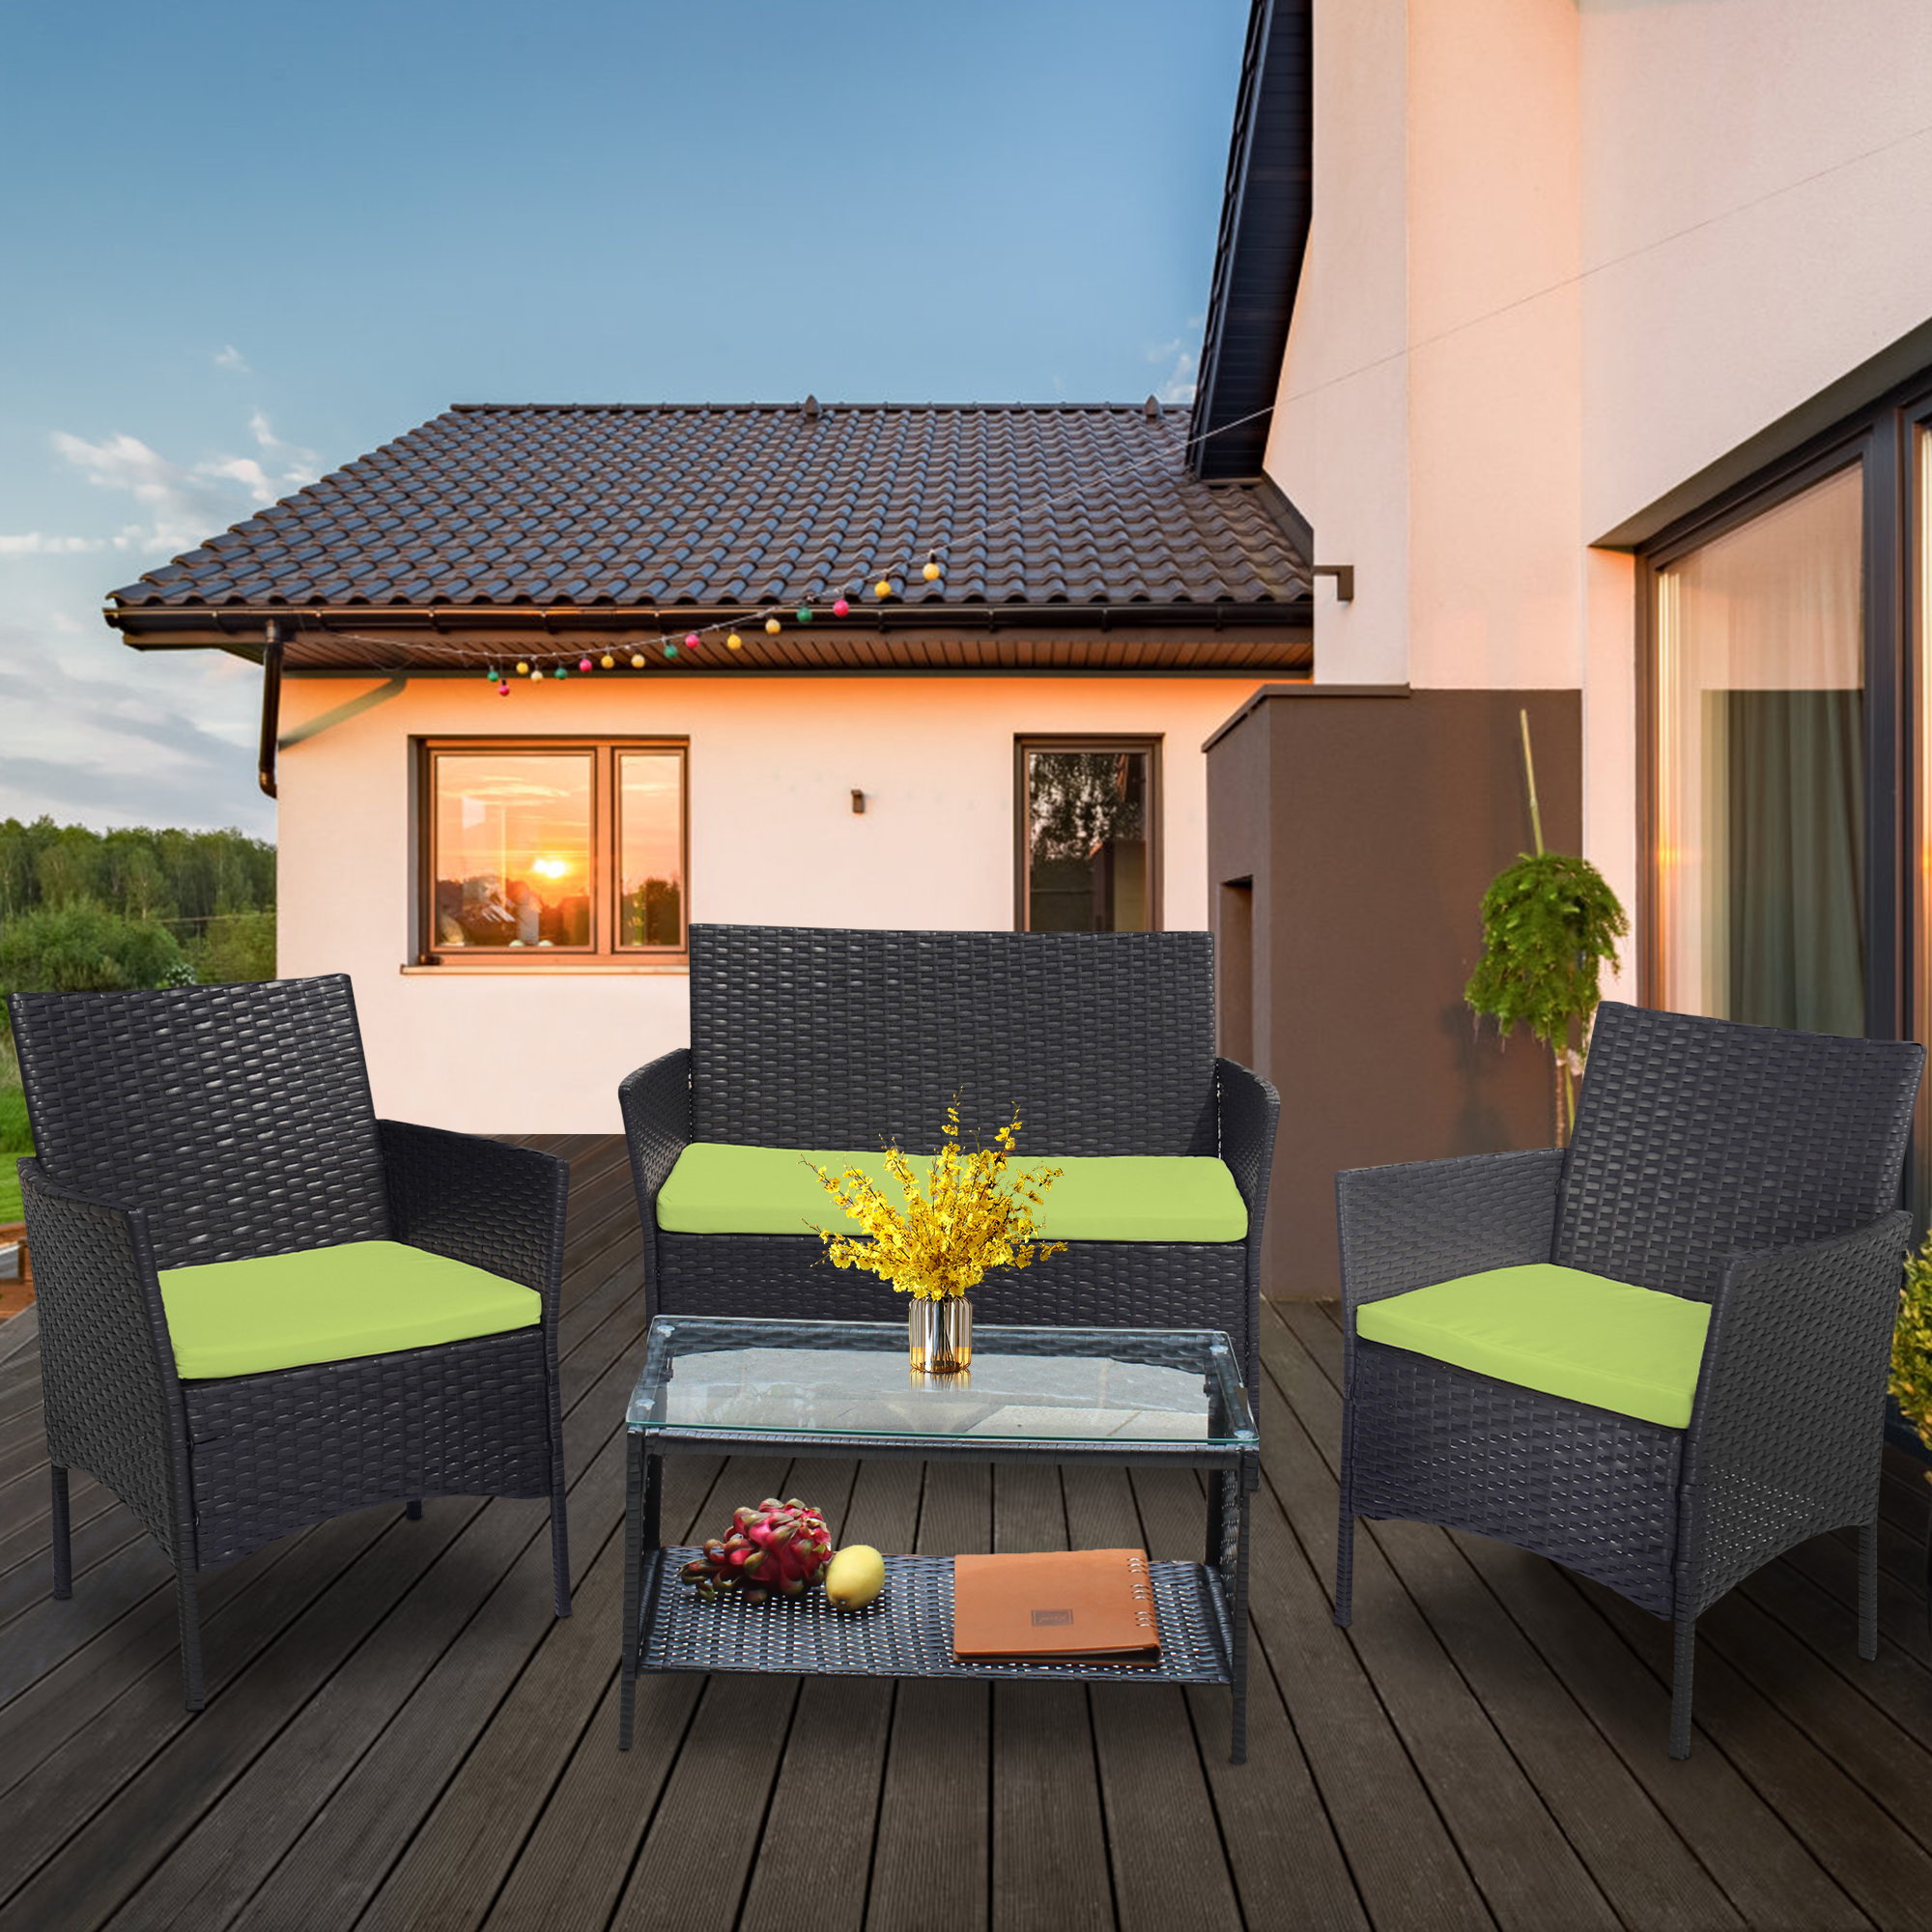 4-Piece Patio Outdoor Rattan Chair, Bistro Table Conversation Set, with Soft Cushion & Glass Table, Patio Rattan Conversation Furniture Set, Leisure Furniture Set for Garden Backyard Balcony, T194 - image 2 of 8